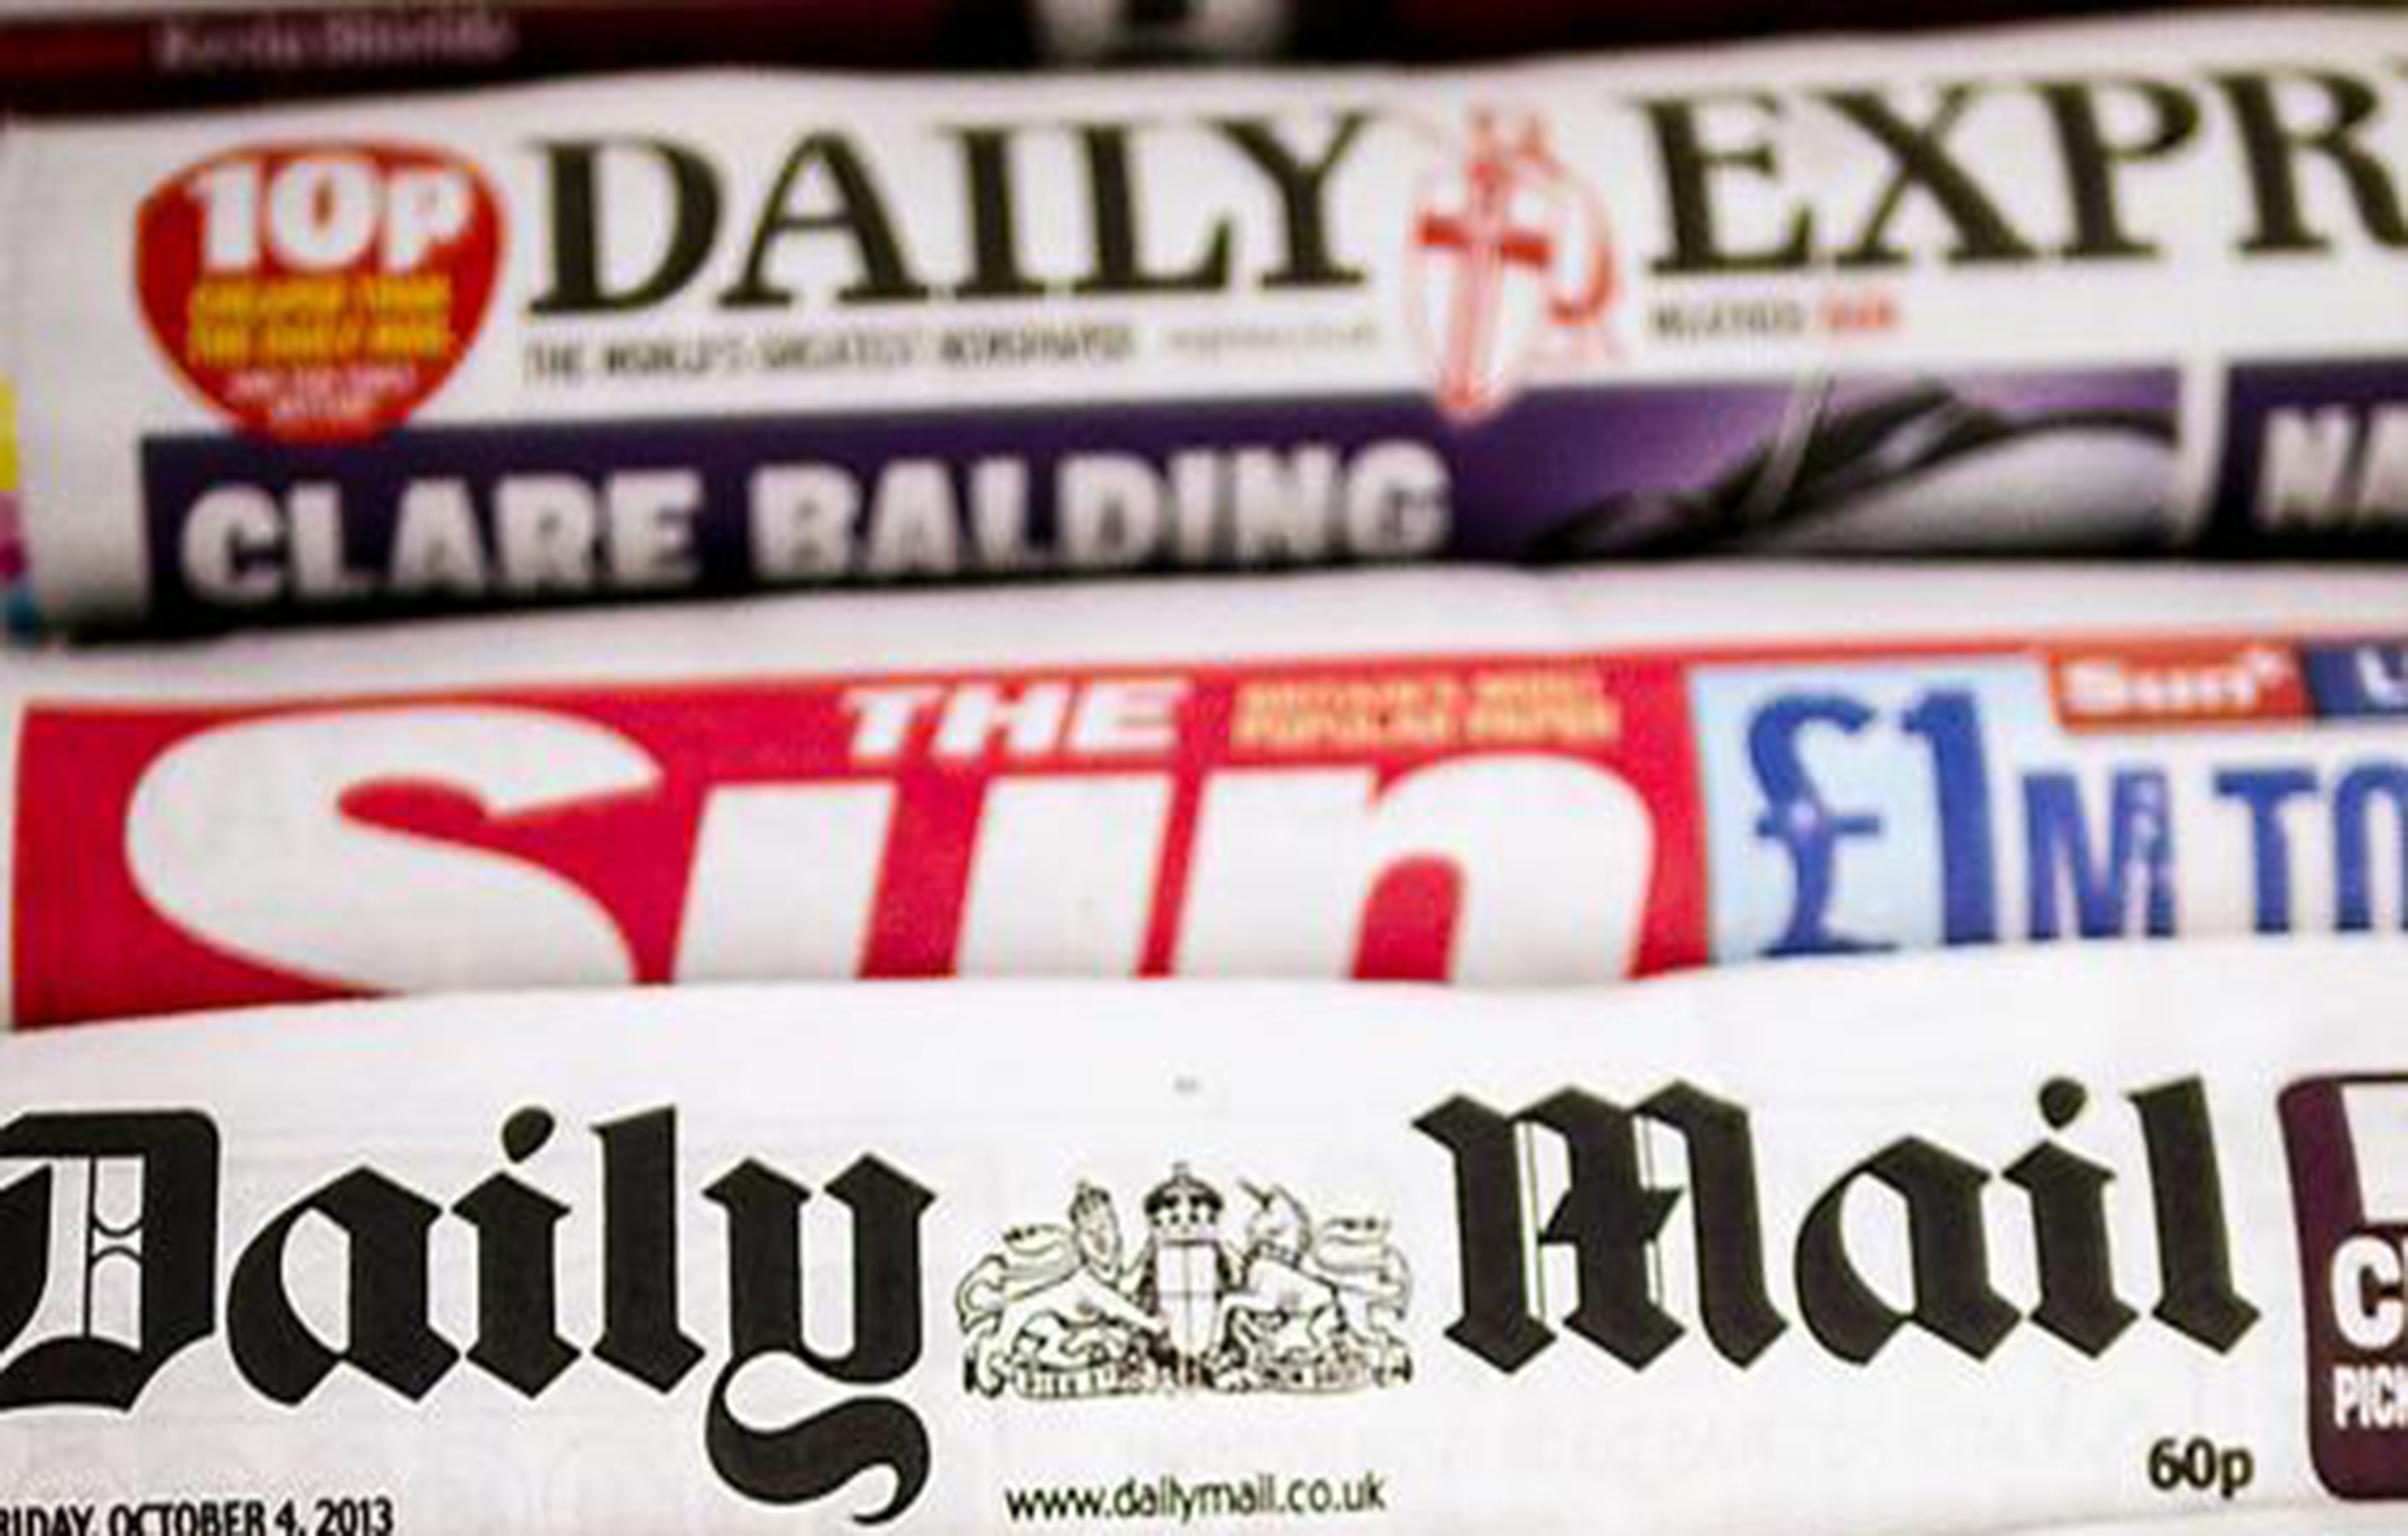 There were more leading front pages about immigration during the campaign than about the economy, with six in 10 of them published by the Daily Express, the Daily Mail and the Daily Telegraph